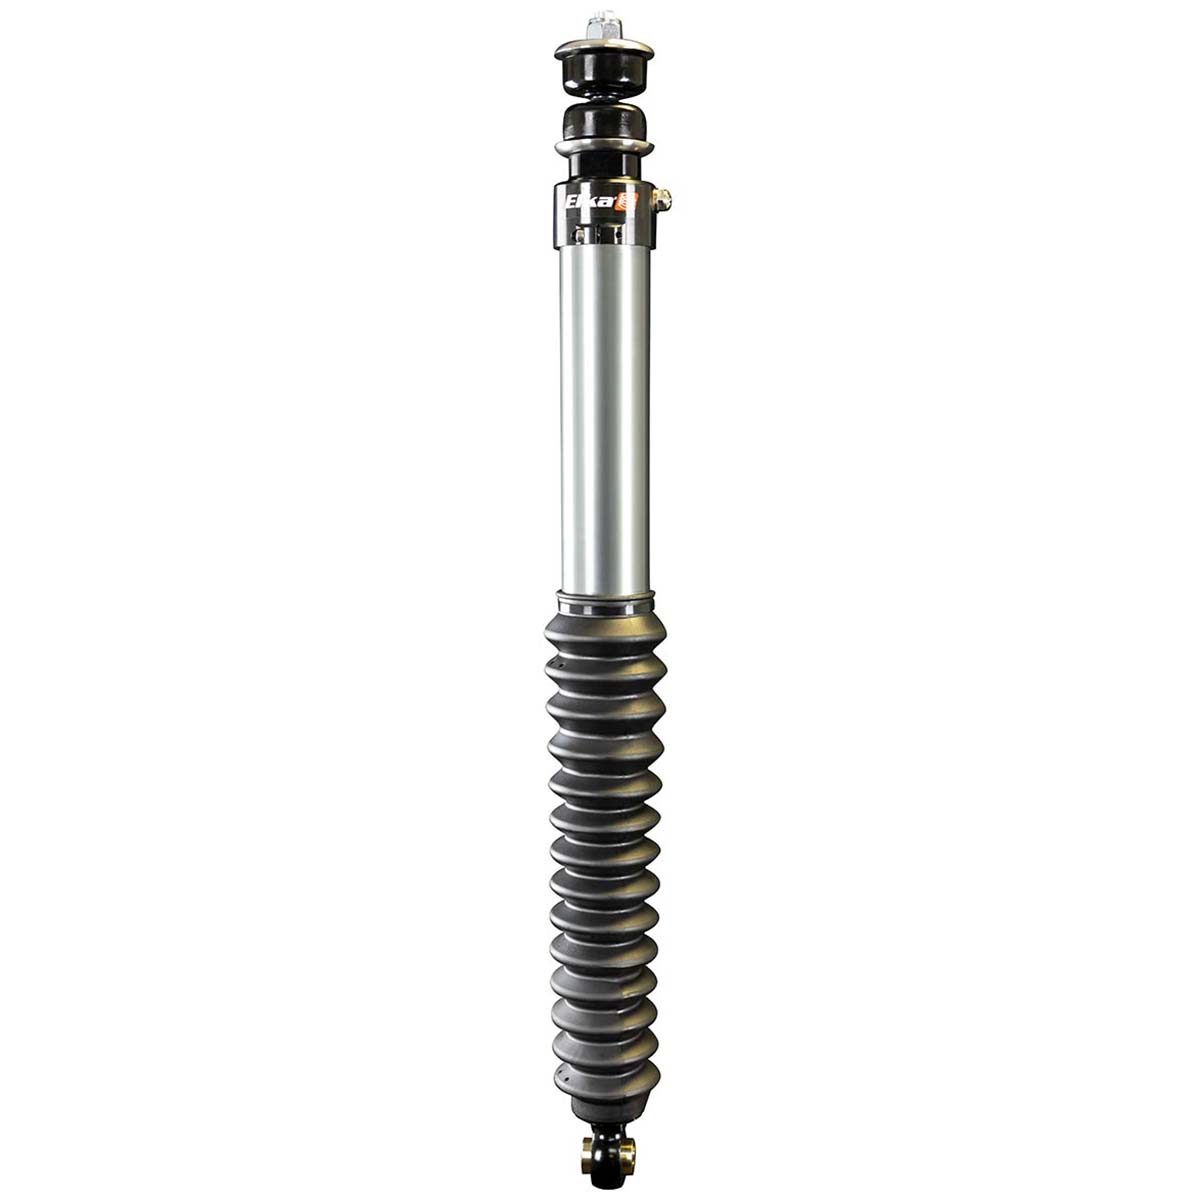 Elka 2.0 IFP FRONT & REAR SHOCKS KIT for TOYOTA 4RUNNER, 2010 to 2020 (with KDSS) (2 in. to 3 in. lift)